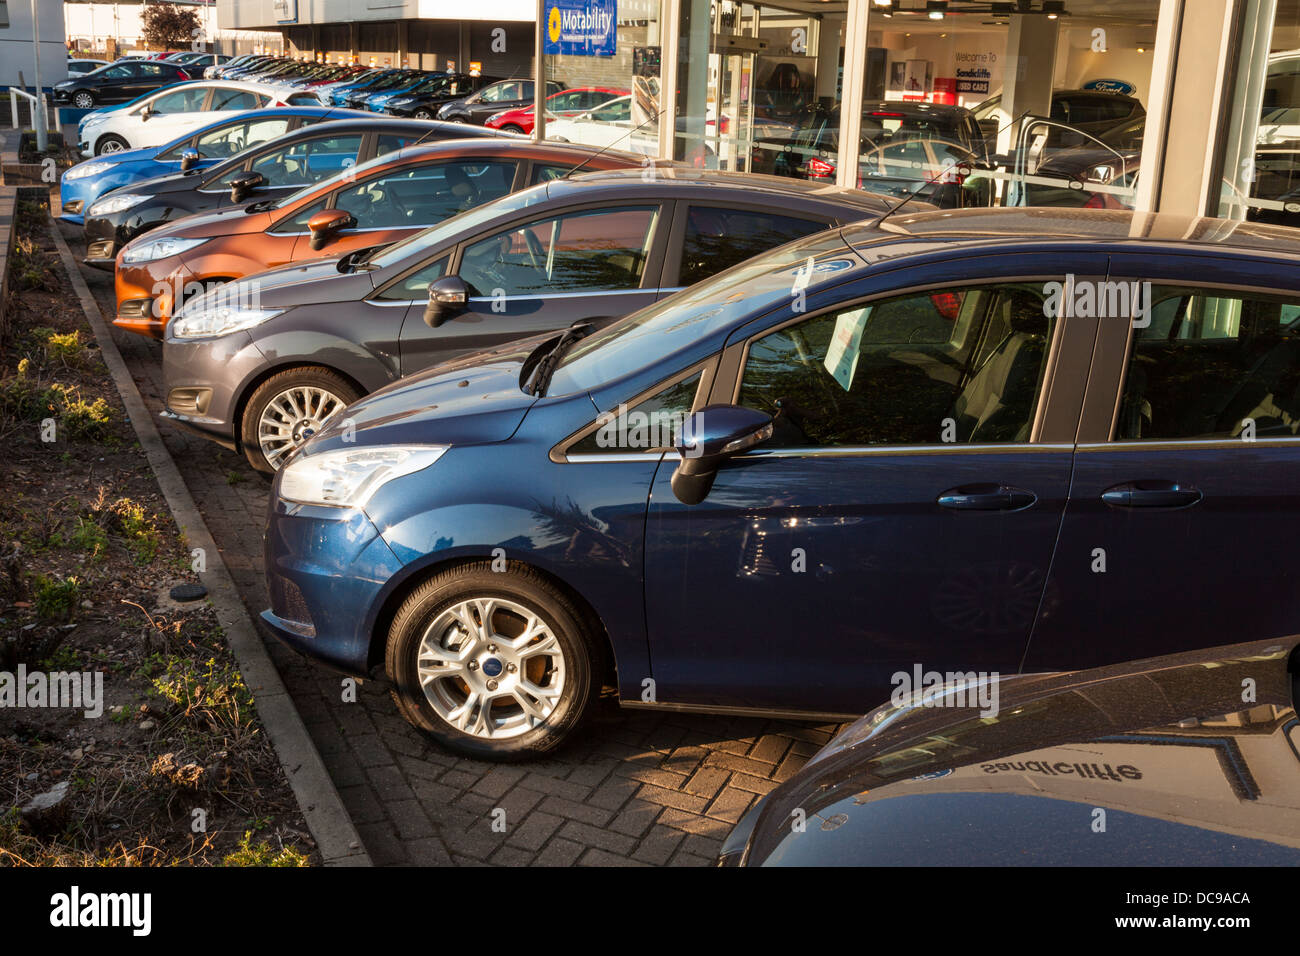 Cars for sale lined up on a forecourt outside a car showroom, England, UK Stock Photo